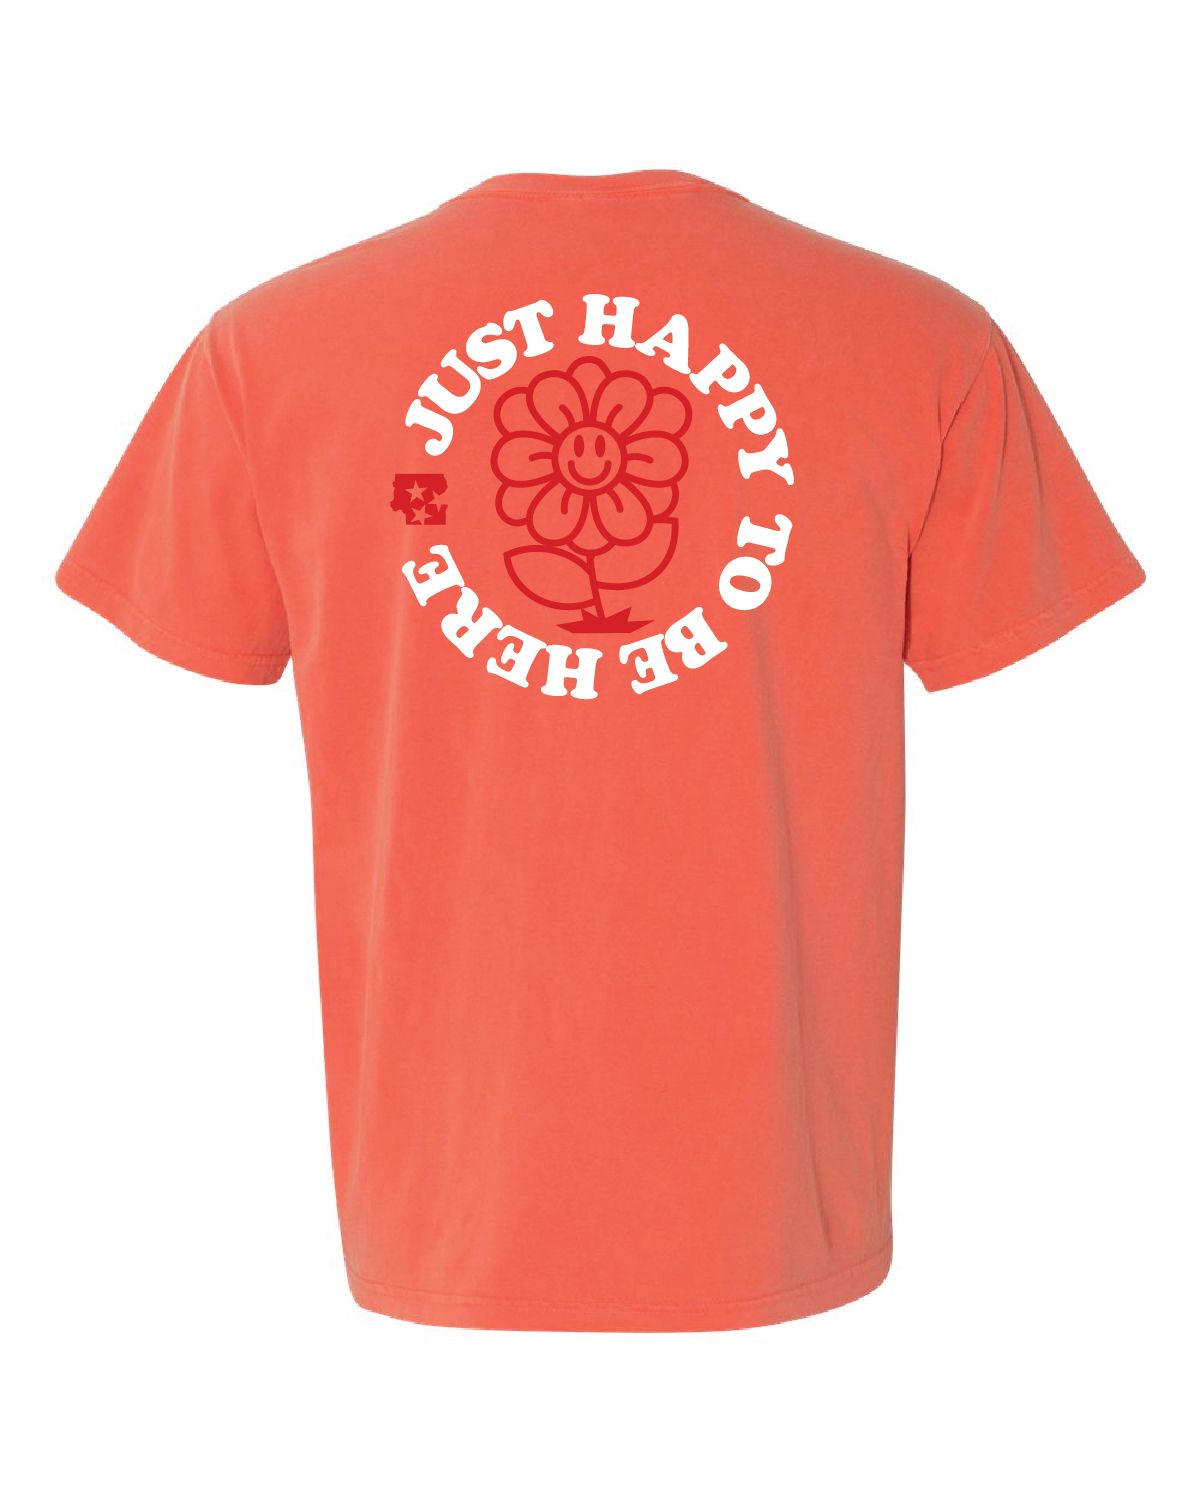 Just Happy To Be Here Tee